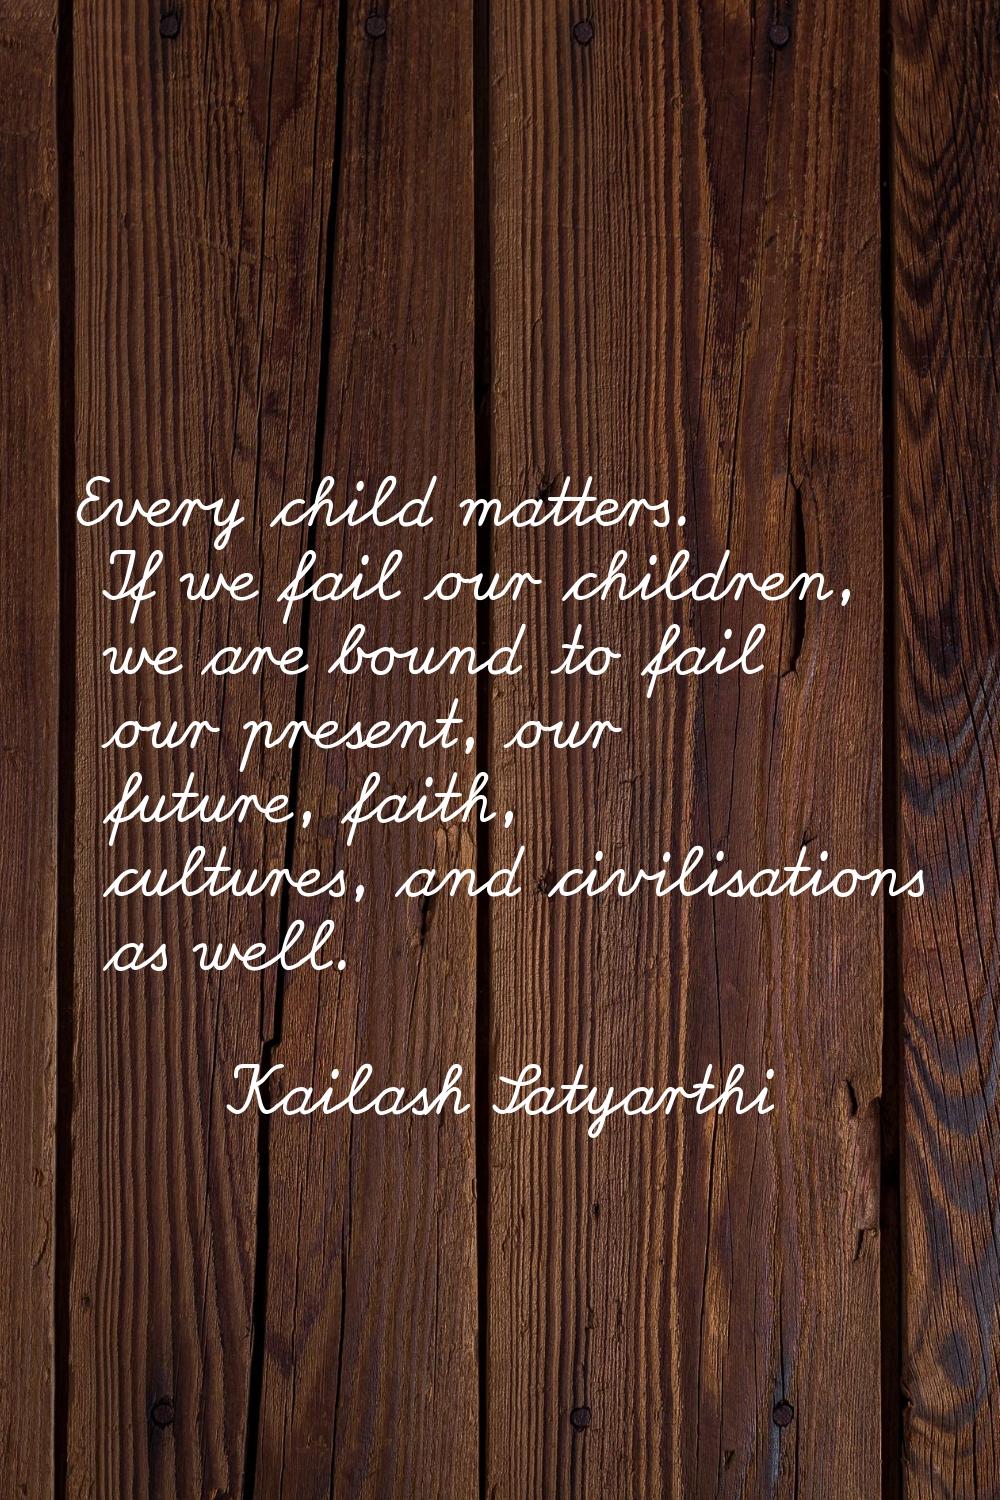 Every child matters. If we fail our children, we are bound to fail our present, our future, faith, 